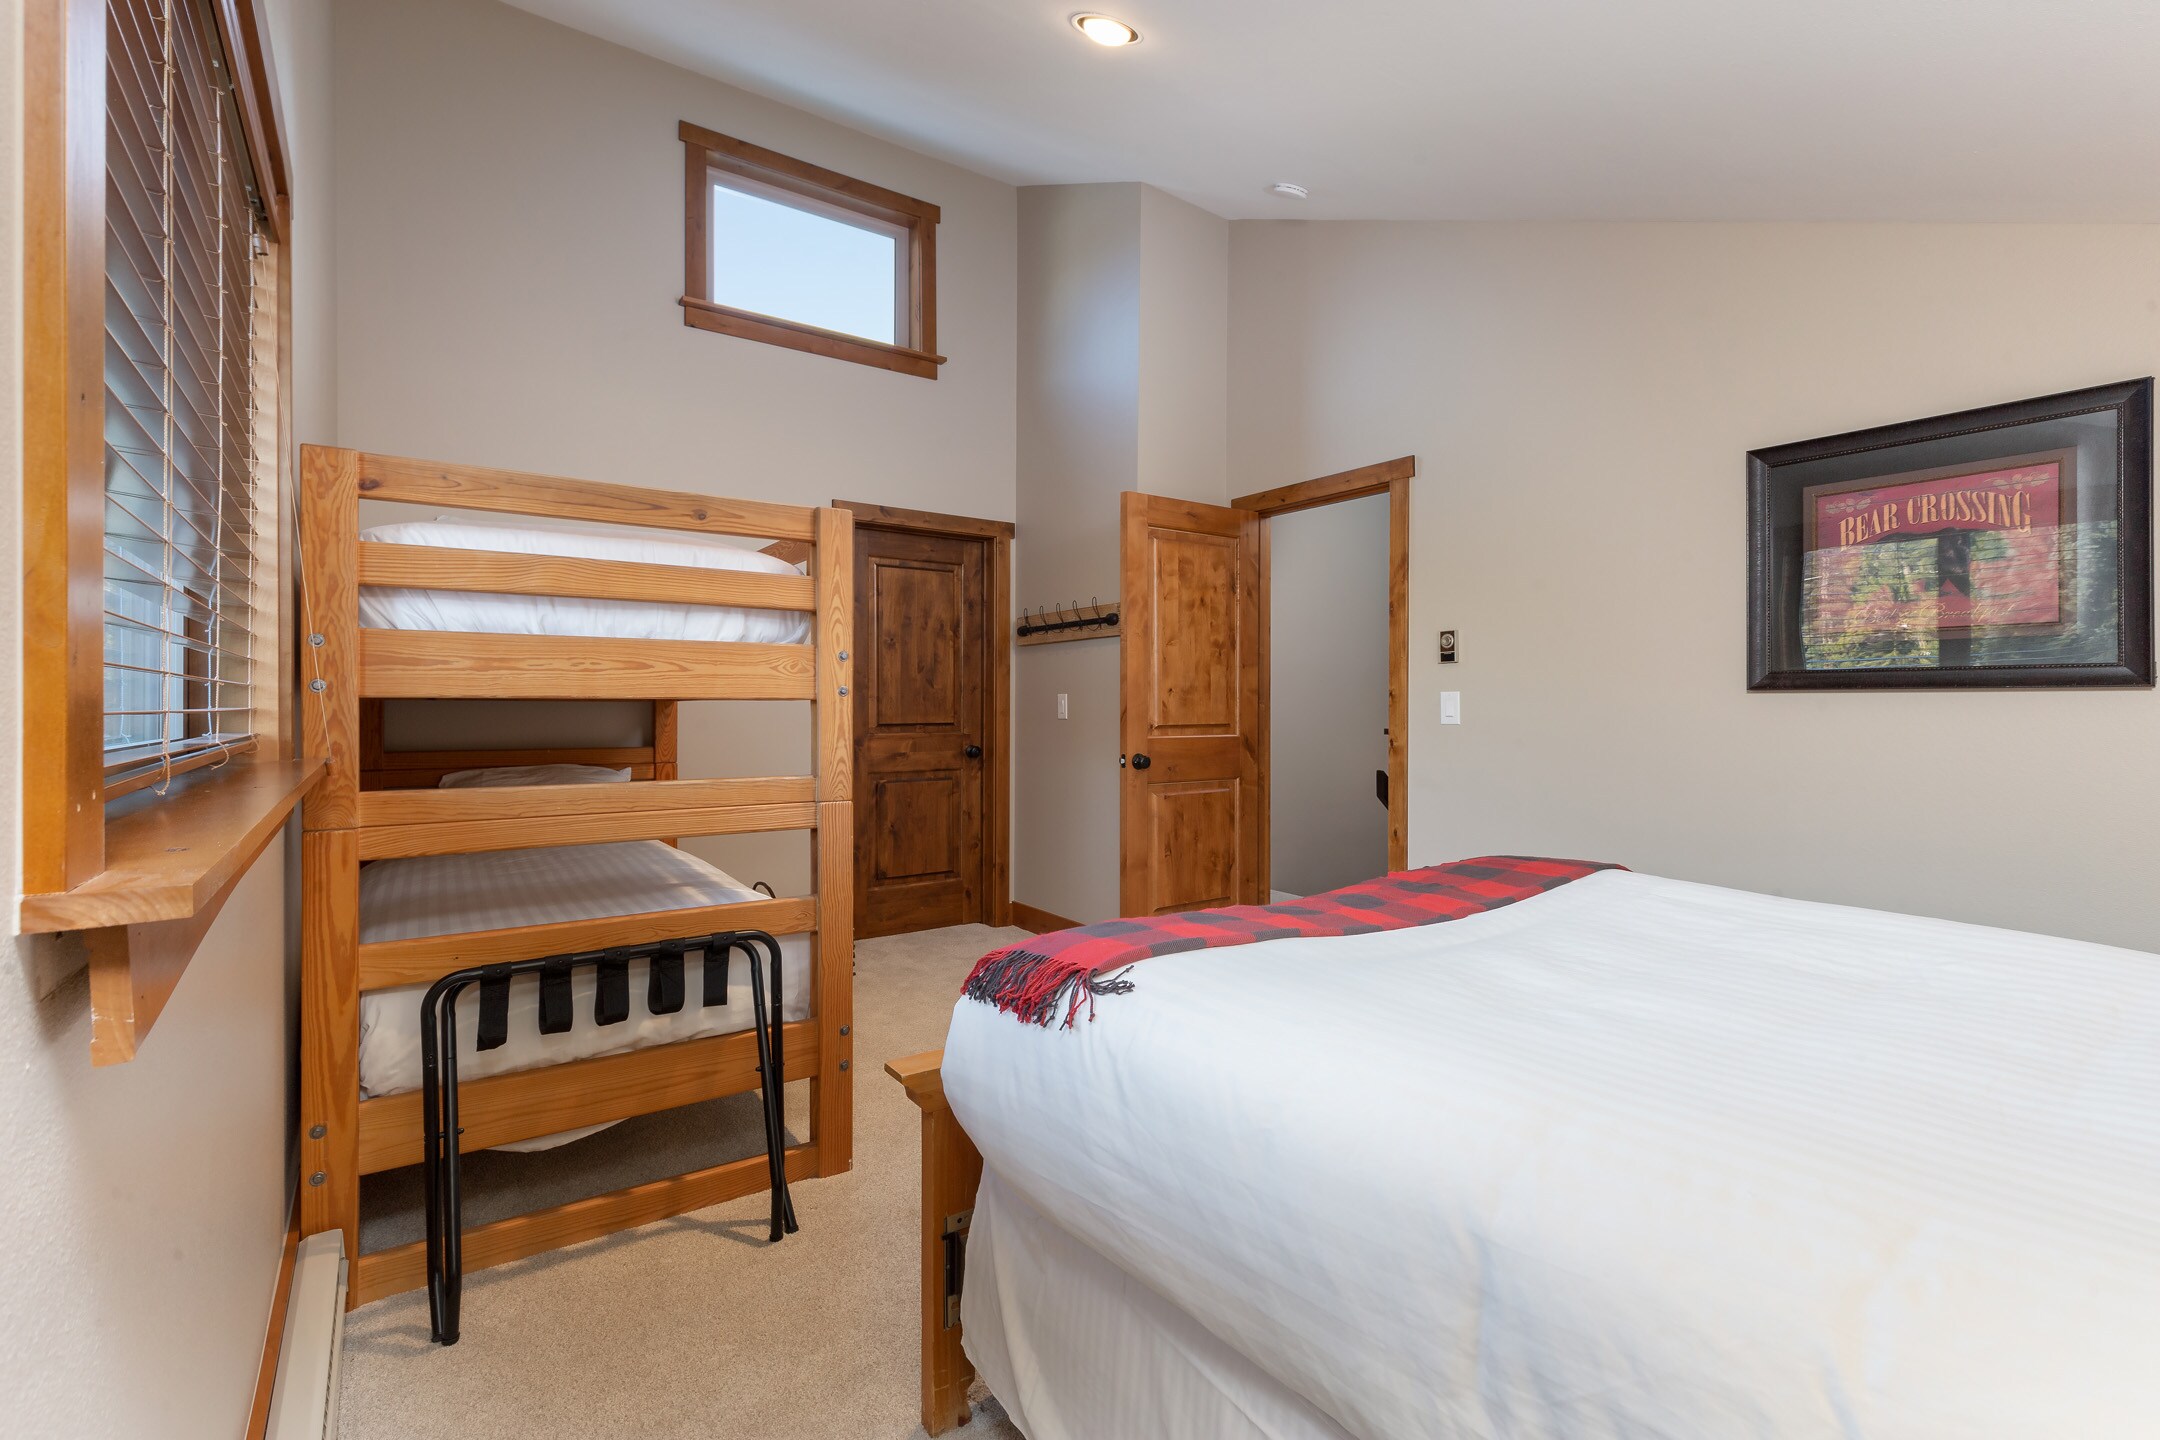 The second guest bedroom is upstairs and features a queen-sized bed and a twin-sized bunk bed. 